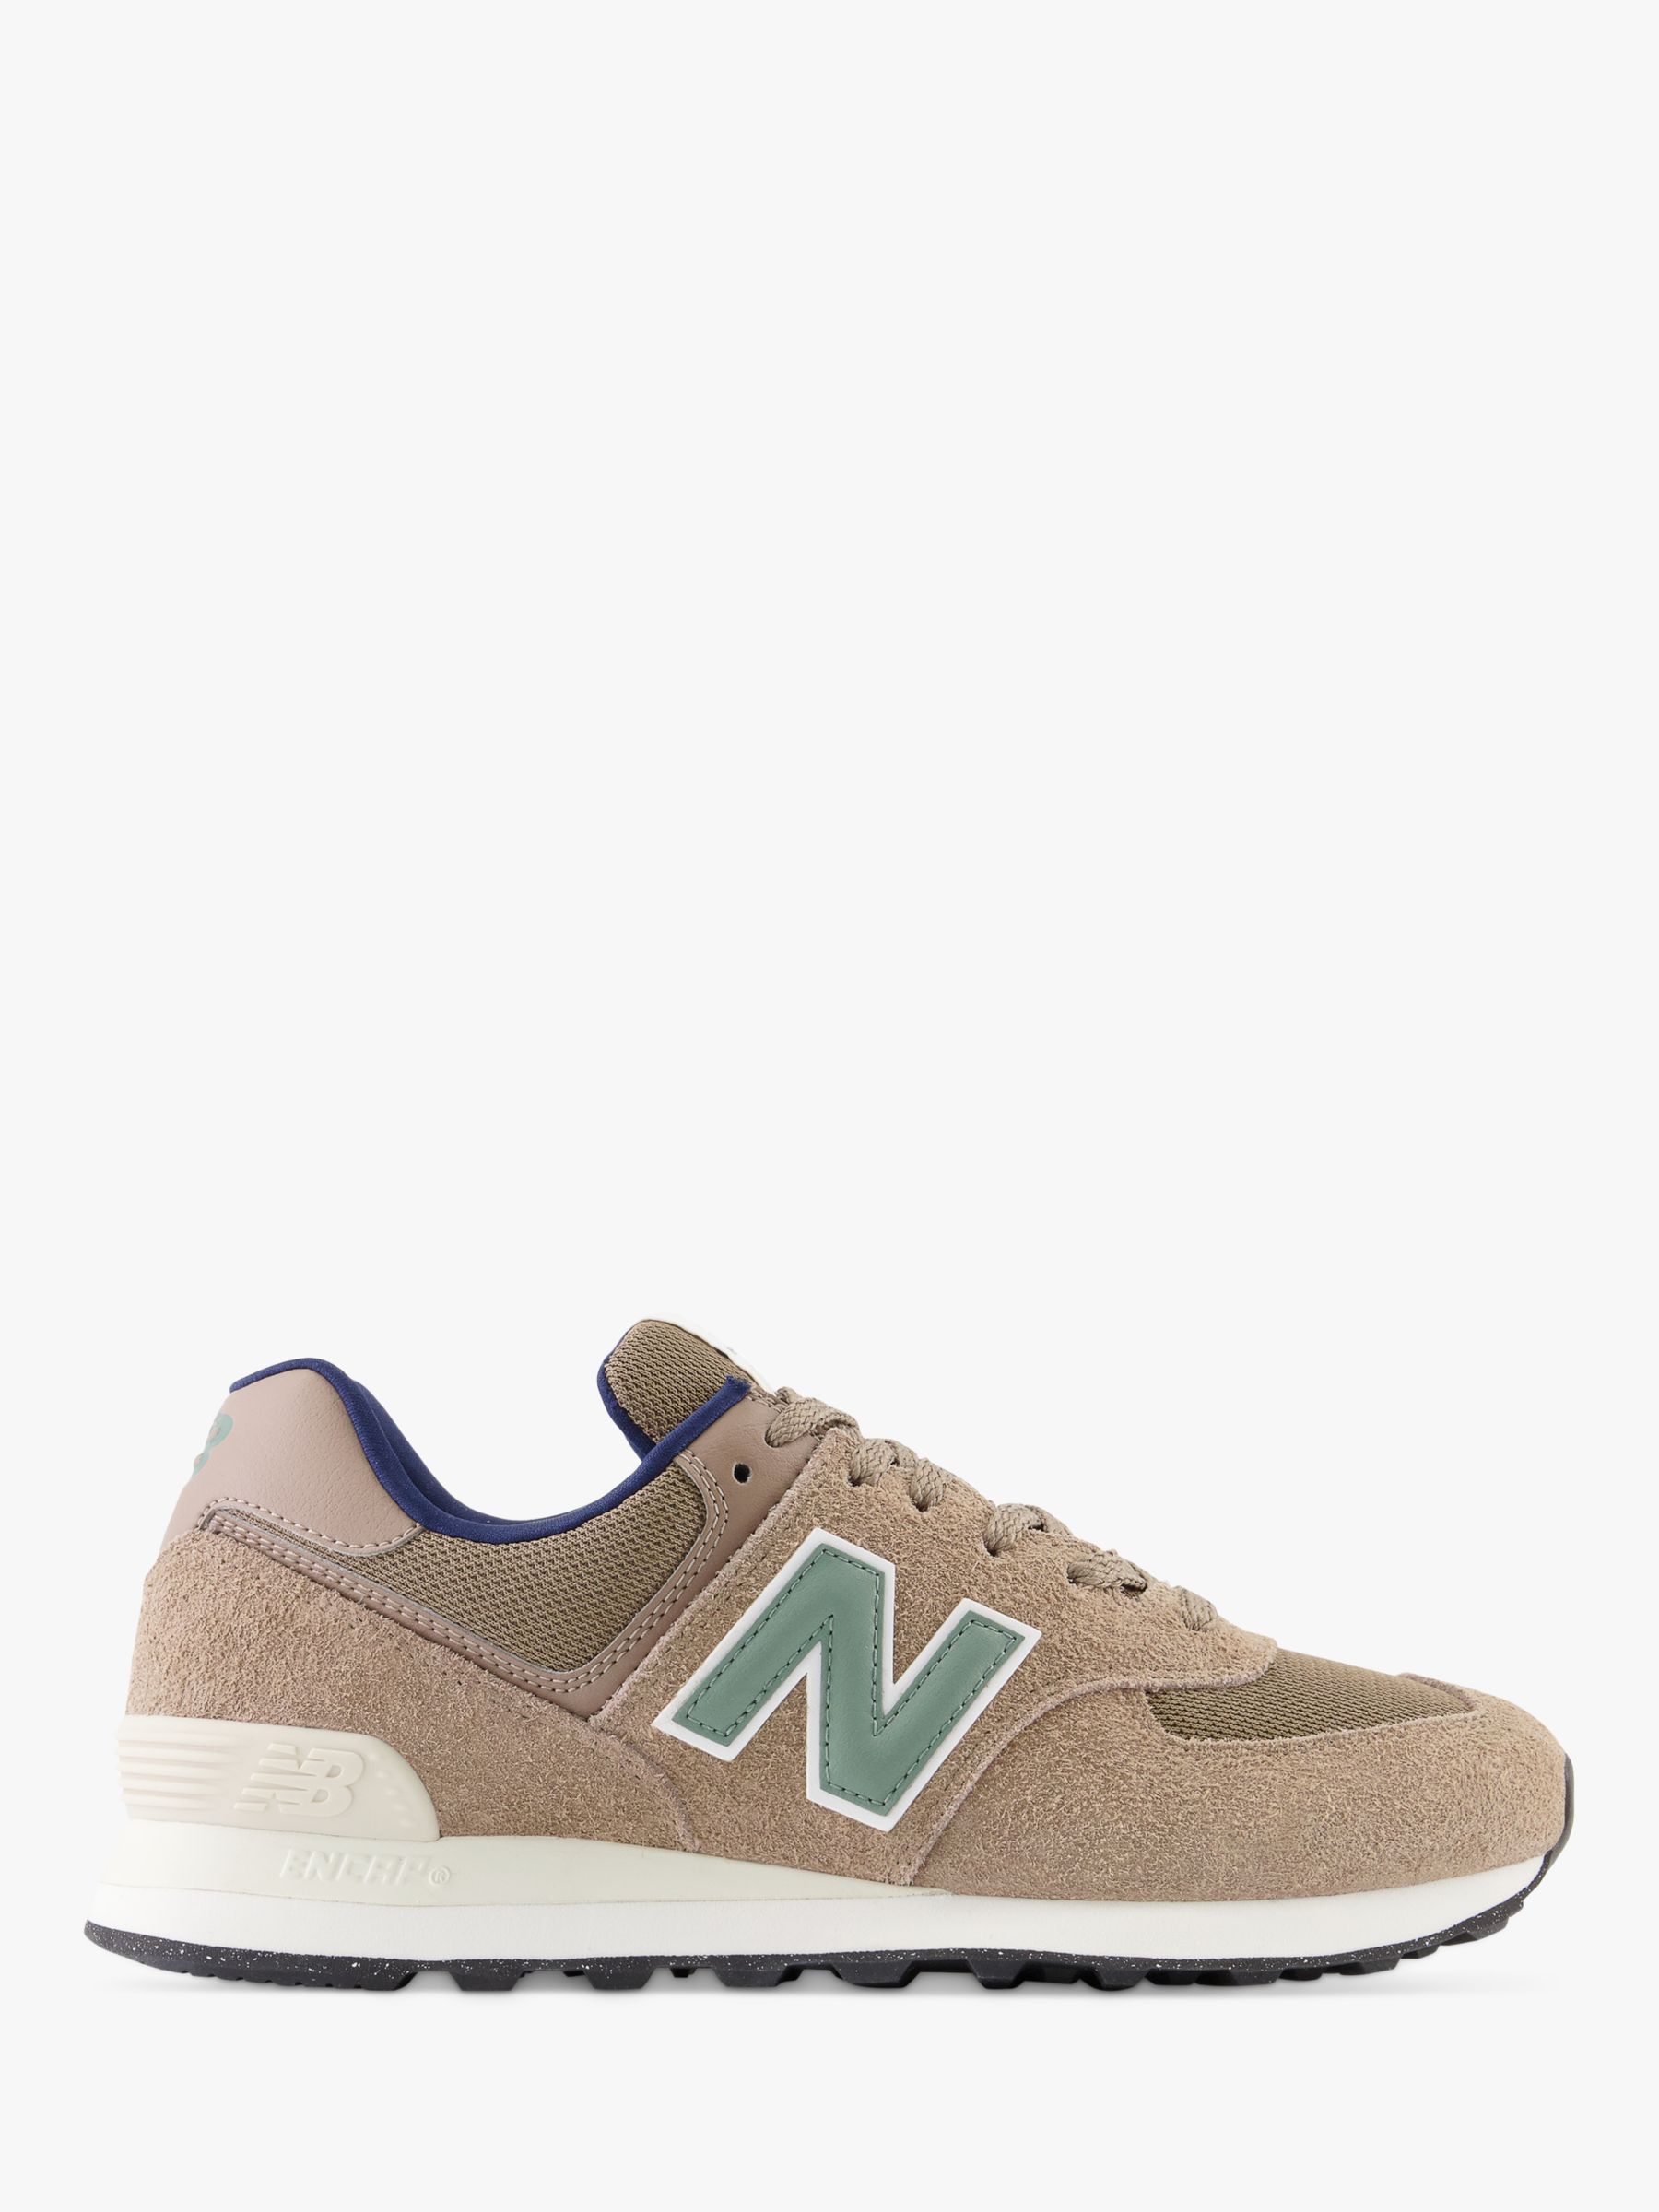 New Balance 574 Suede Trainers, Brown, 7